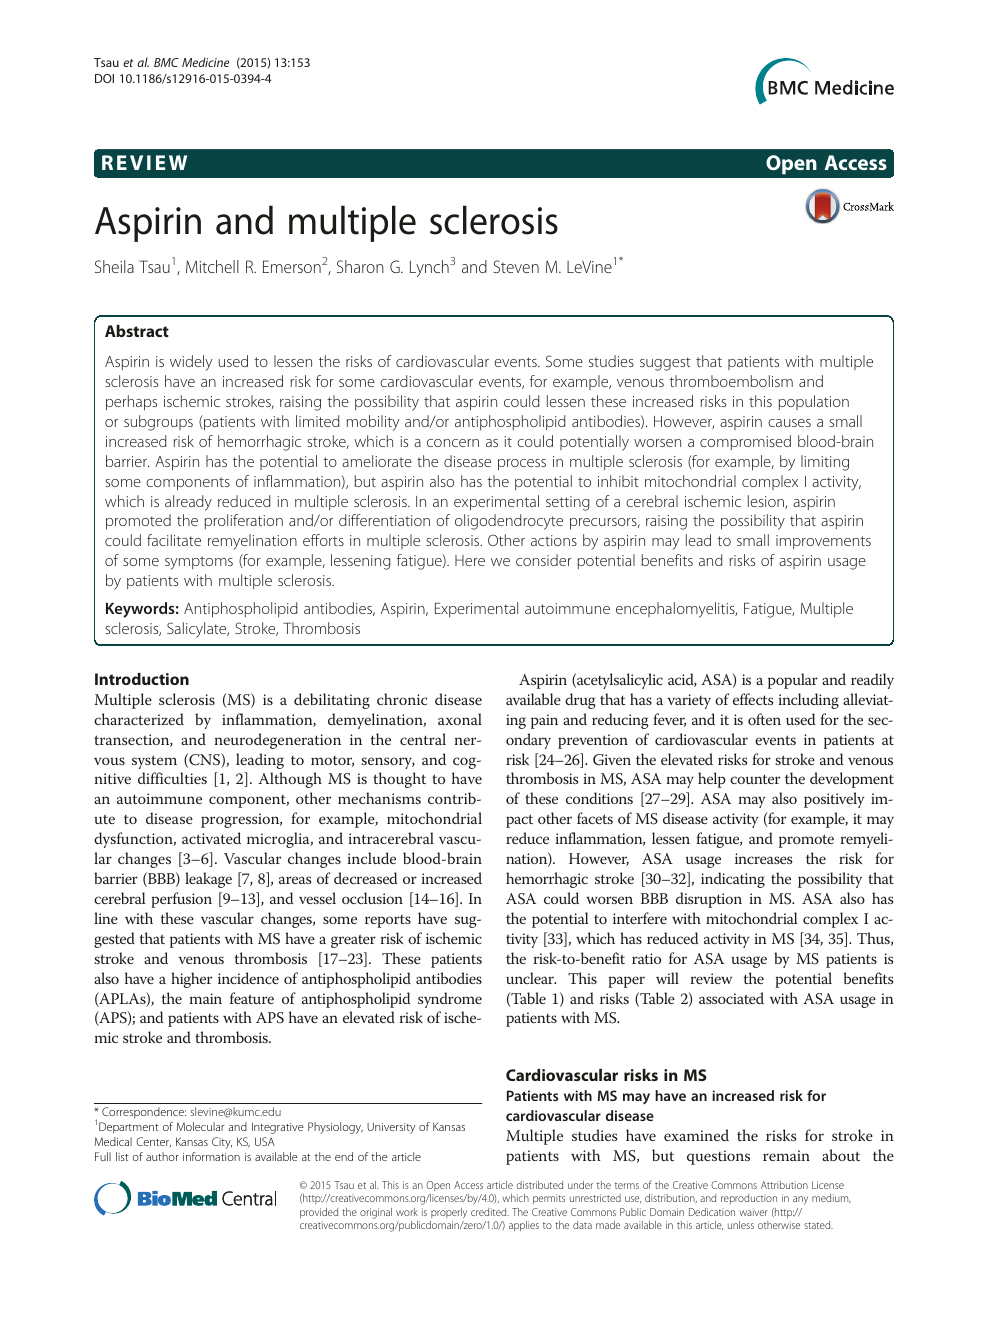 multiple sclerosis research articles